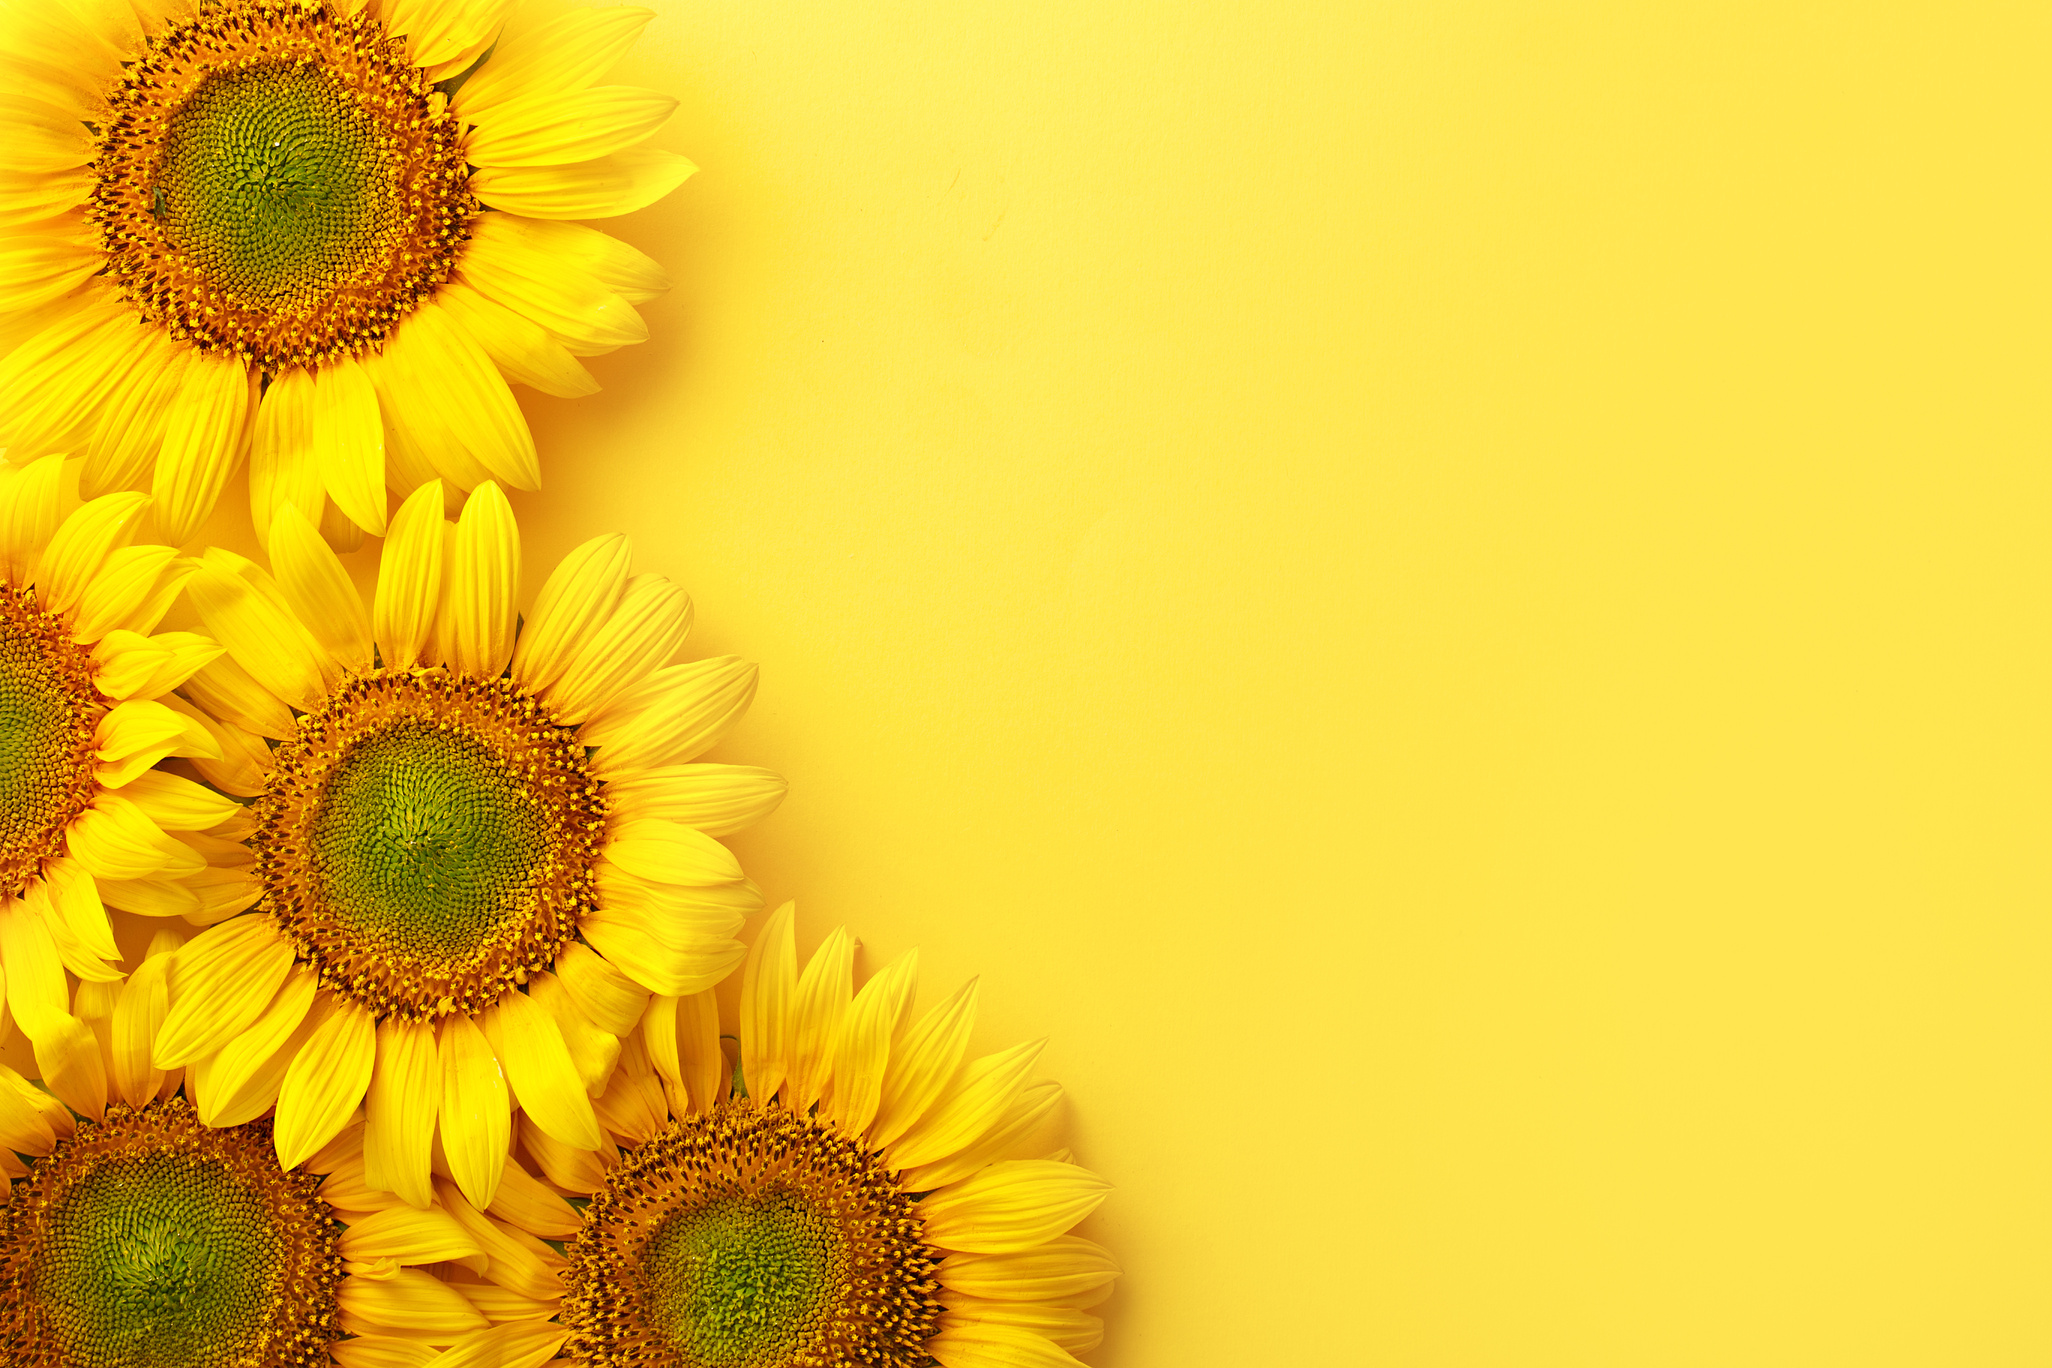 Sunflowers on a yellow background. Copy space. Top view